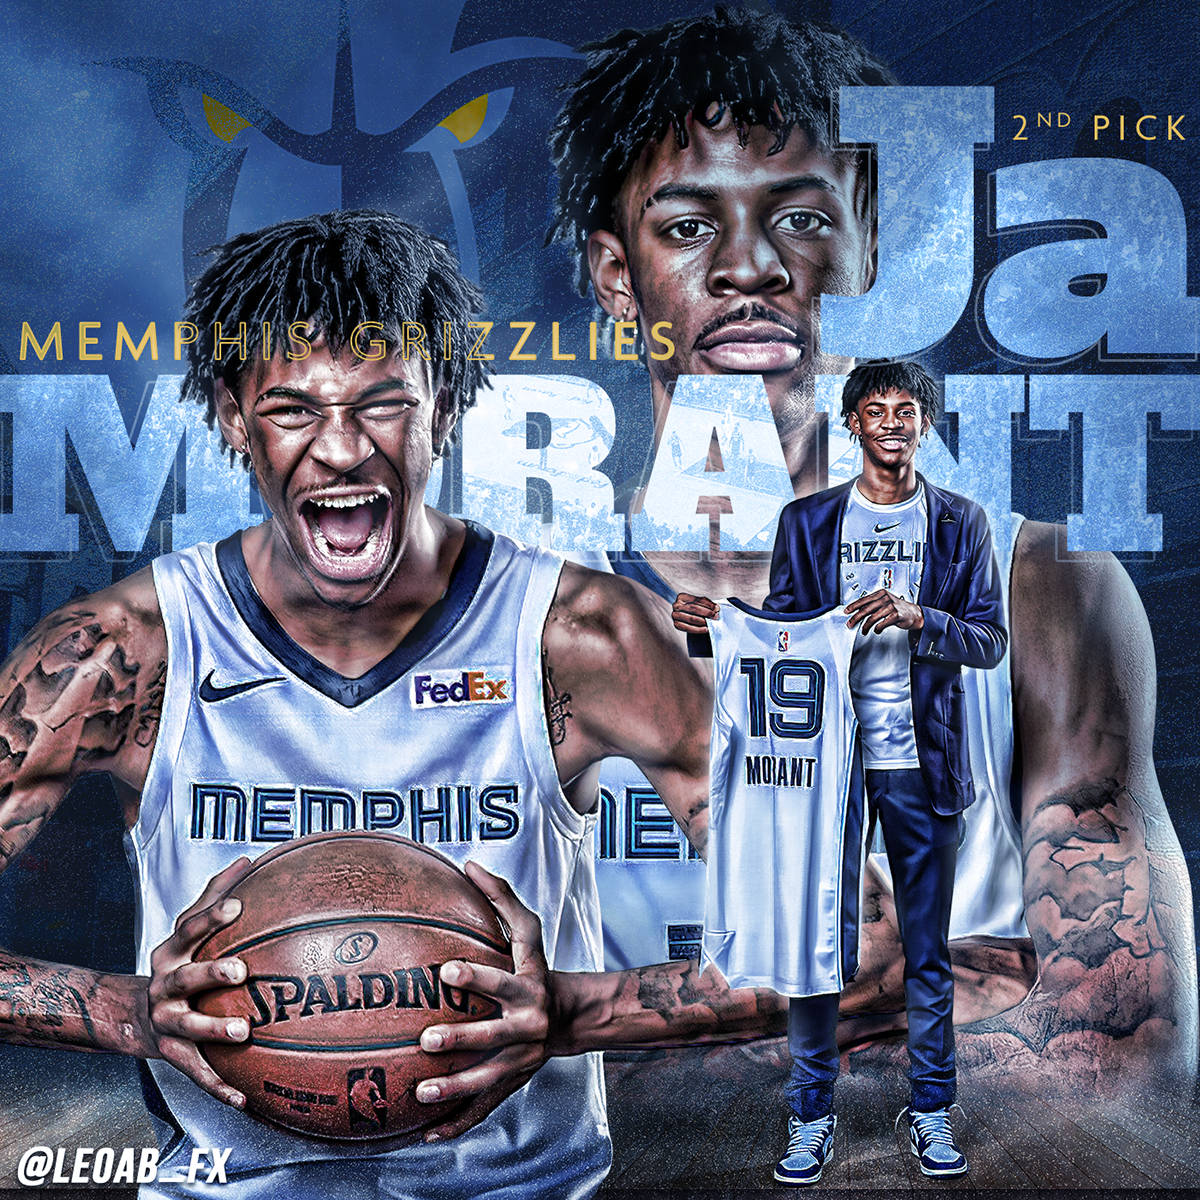 Thrilling NBA Action With Ja Morant Wallpaper